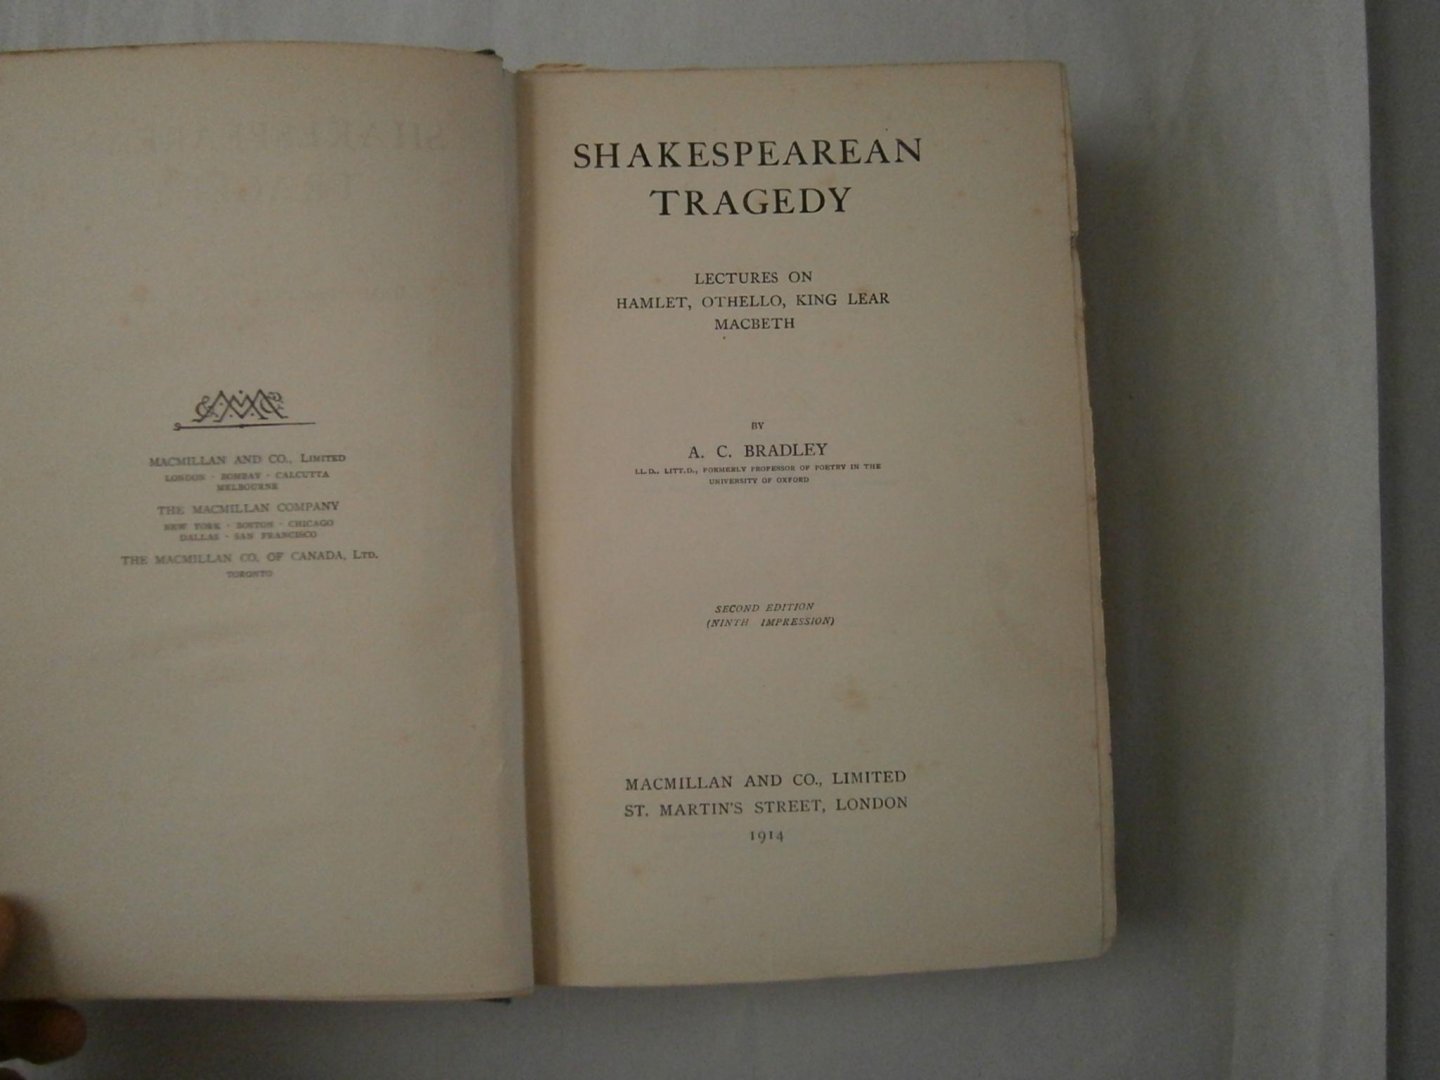 Shakespeare, W. - Shakespearean Tragedy, lectures on Hamlet, Othello, King Lear, MacBeth